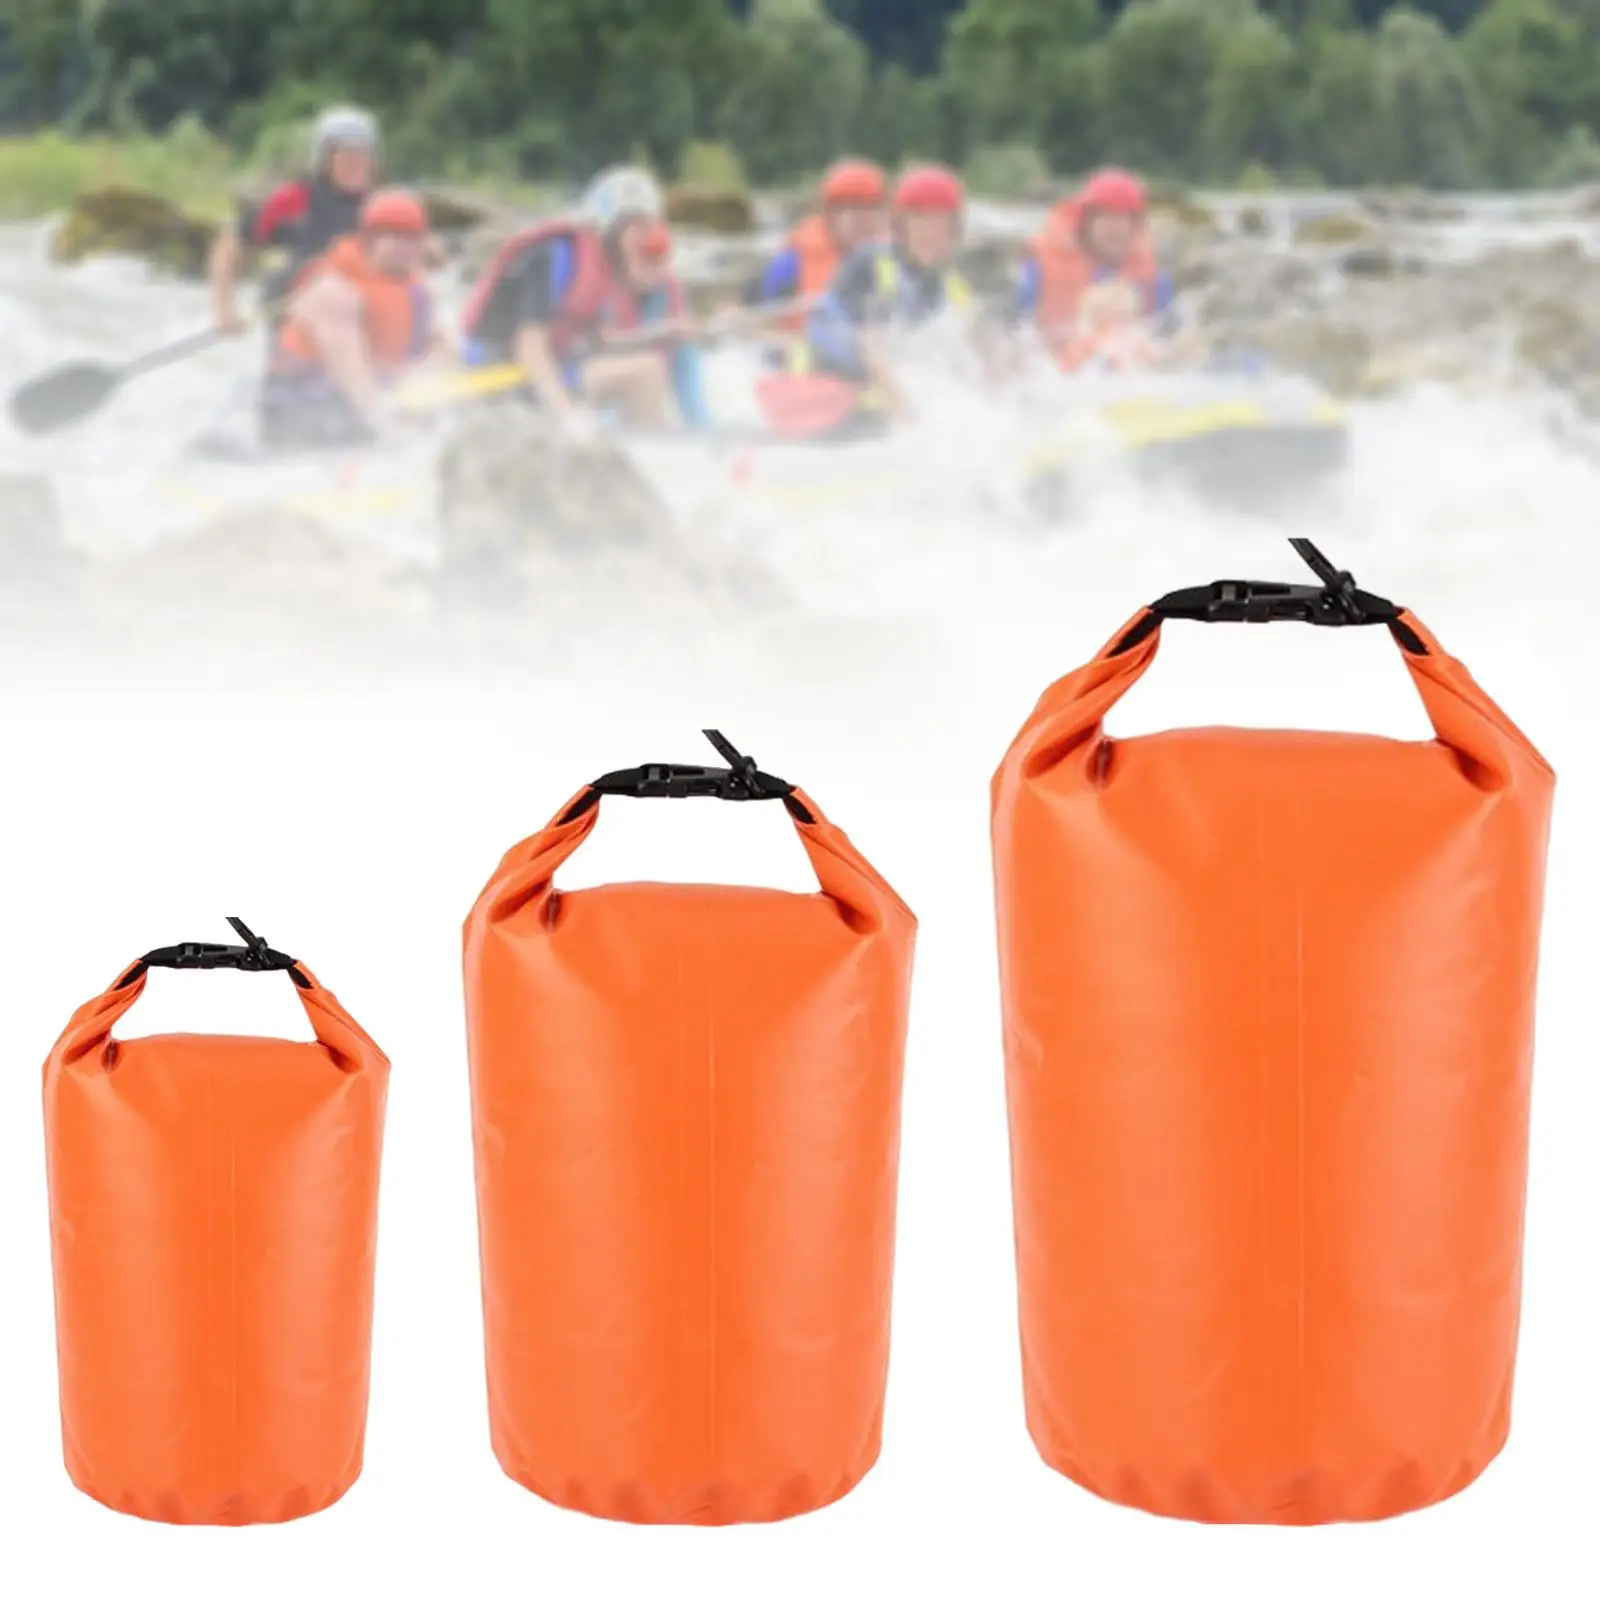 3x Waterproof Dry Bags Roll Top Leakproof 8L 40L 70L Dry Sack Bags Float Pouch for Camping Water Sports Beach Canoeing Drifting